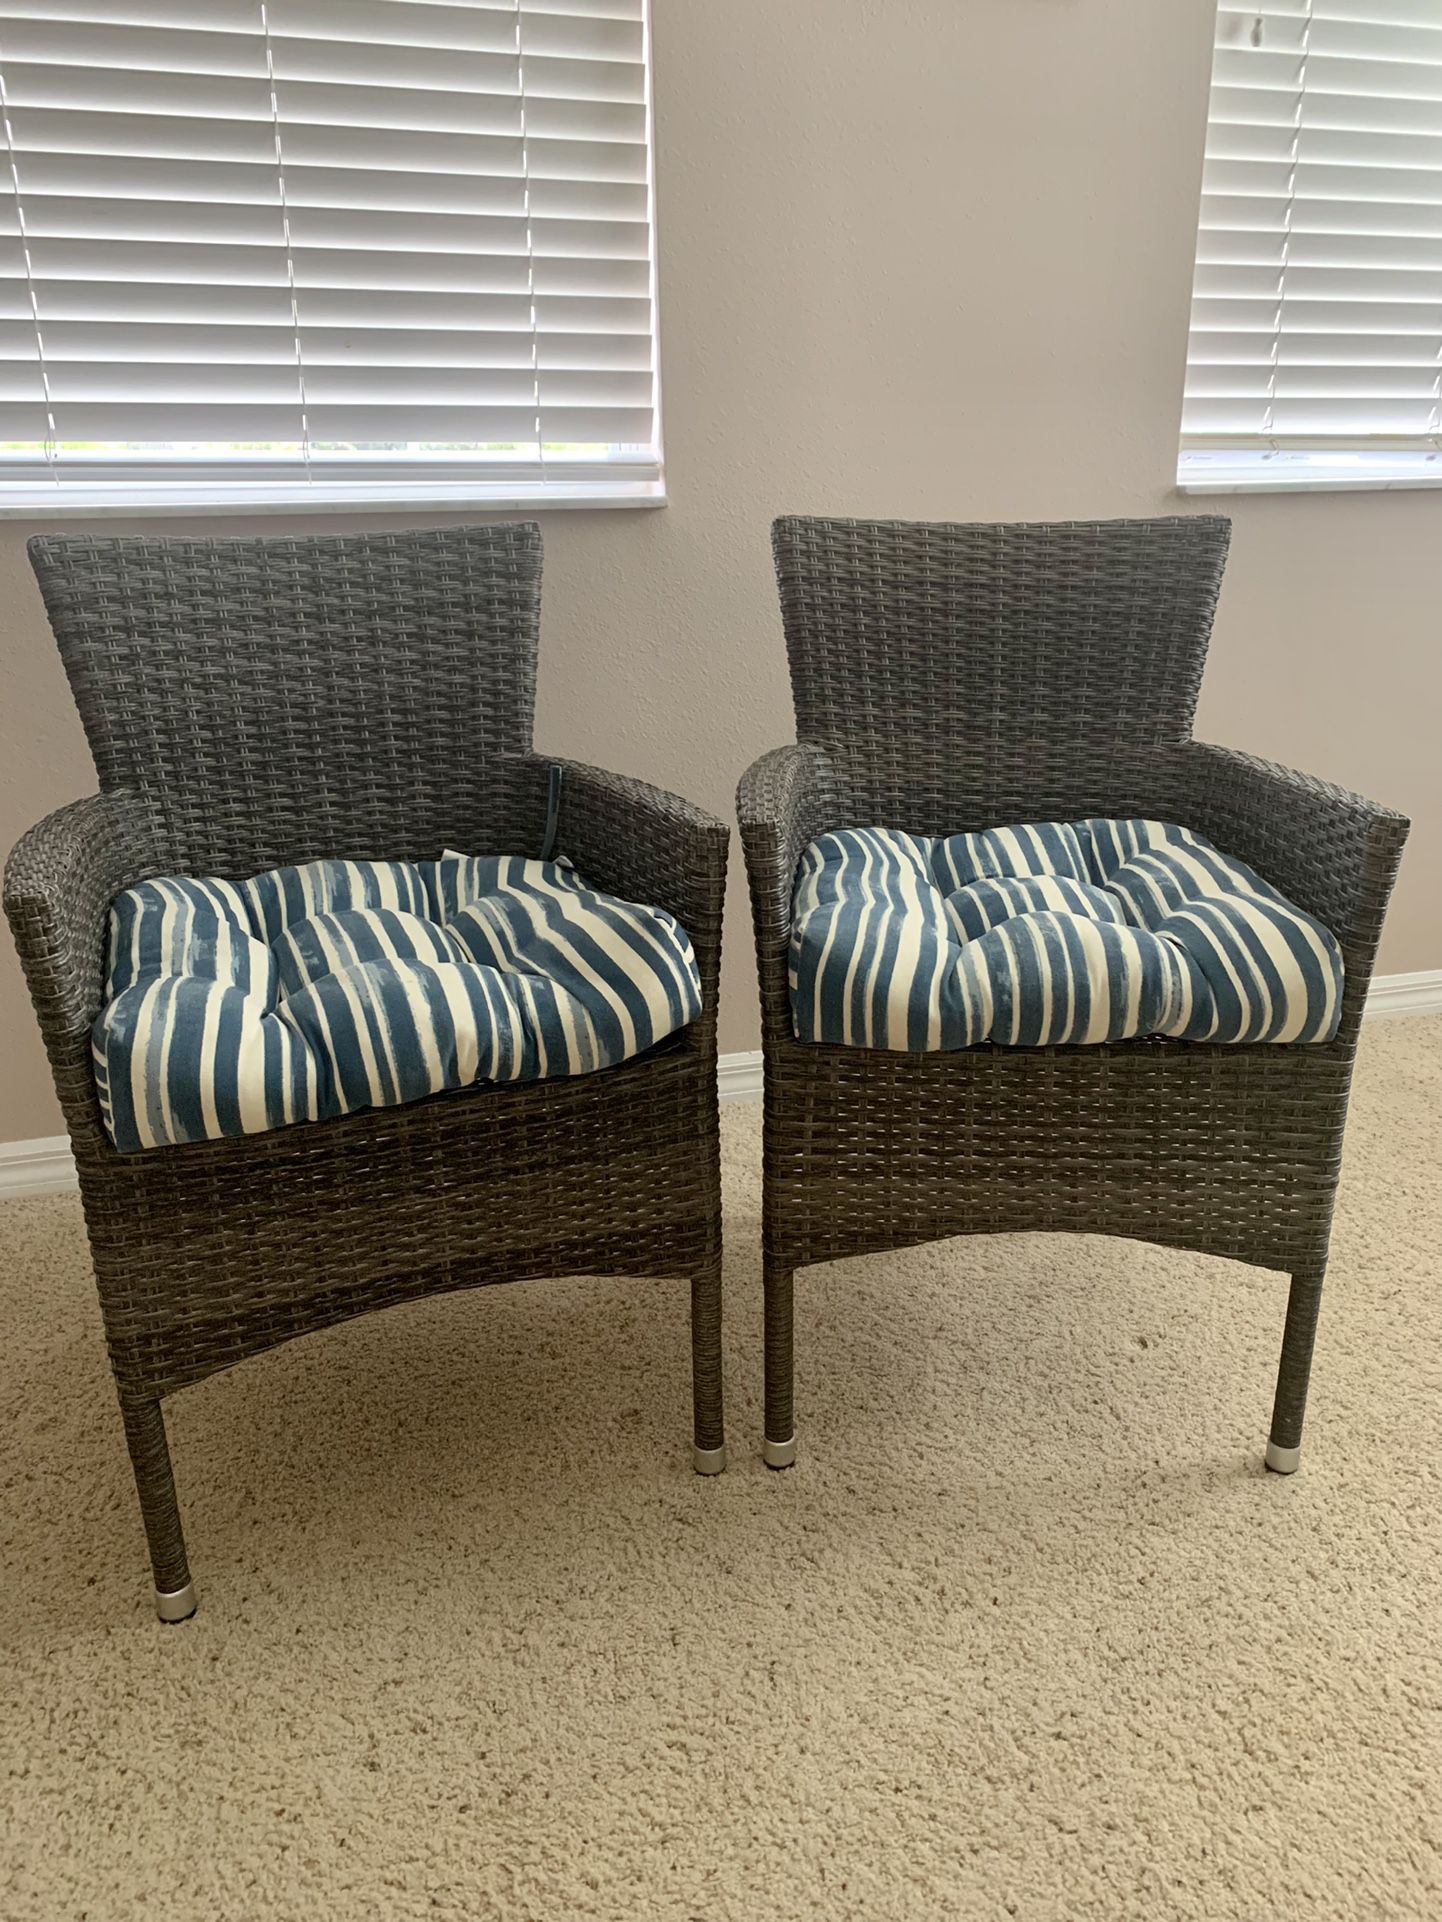 Nautica Set of 2 Wicker Patio Chairs with Cushions